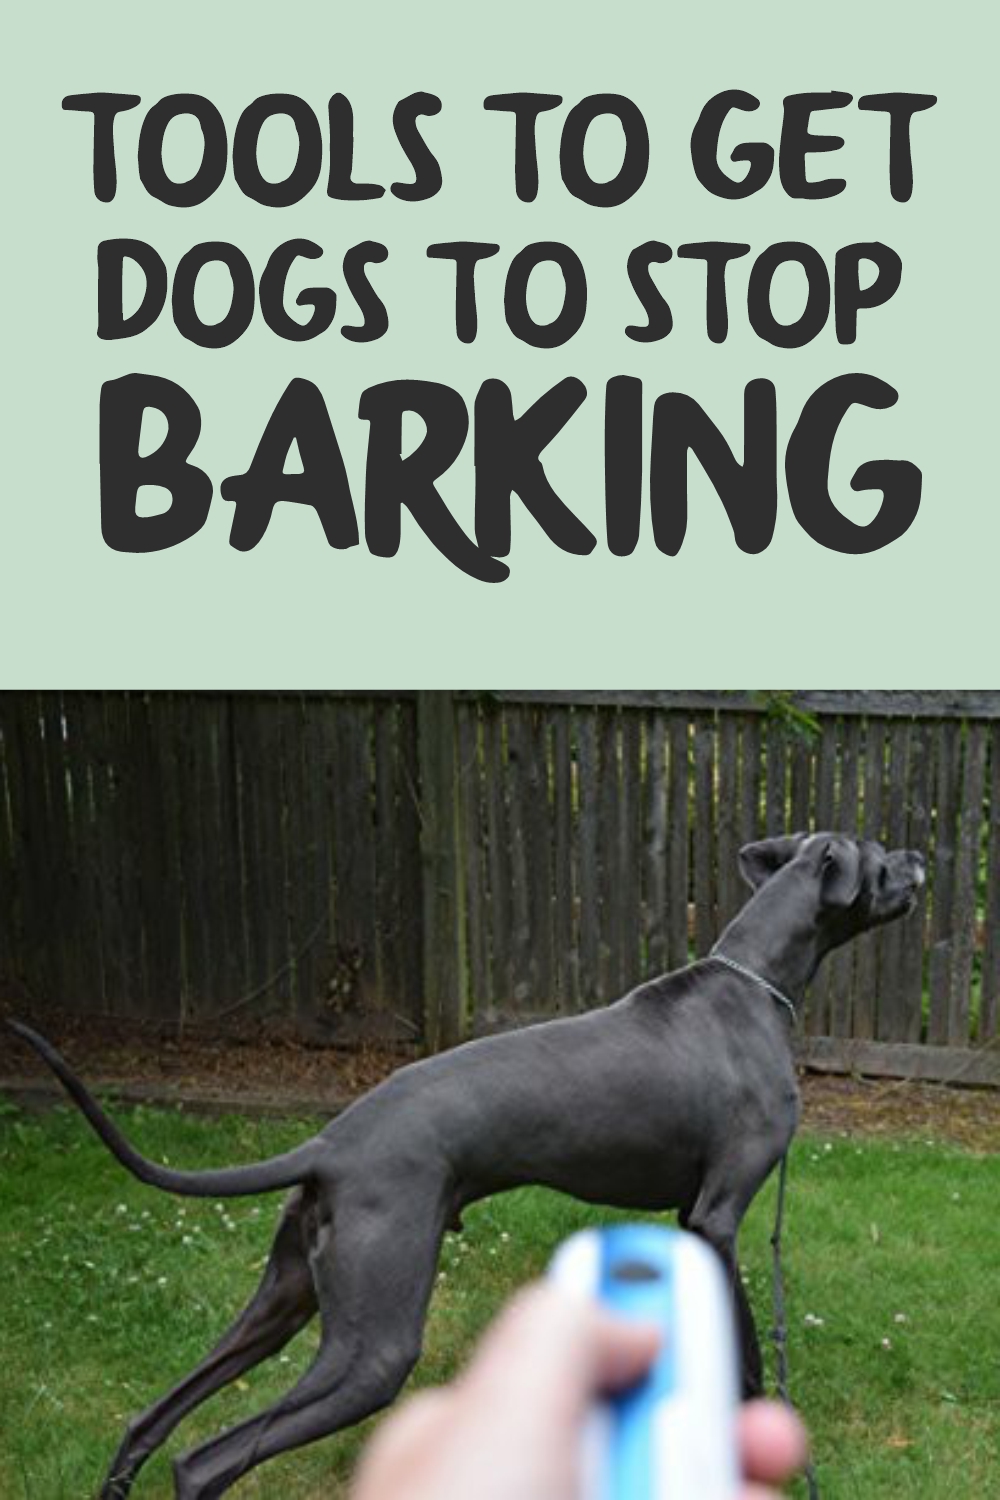 Tools to Get Dogs to Stop Barking